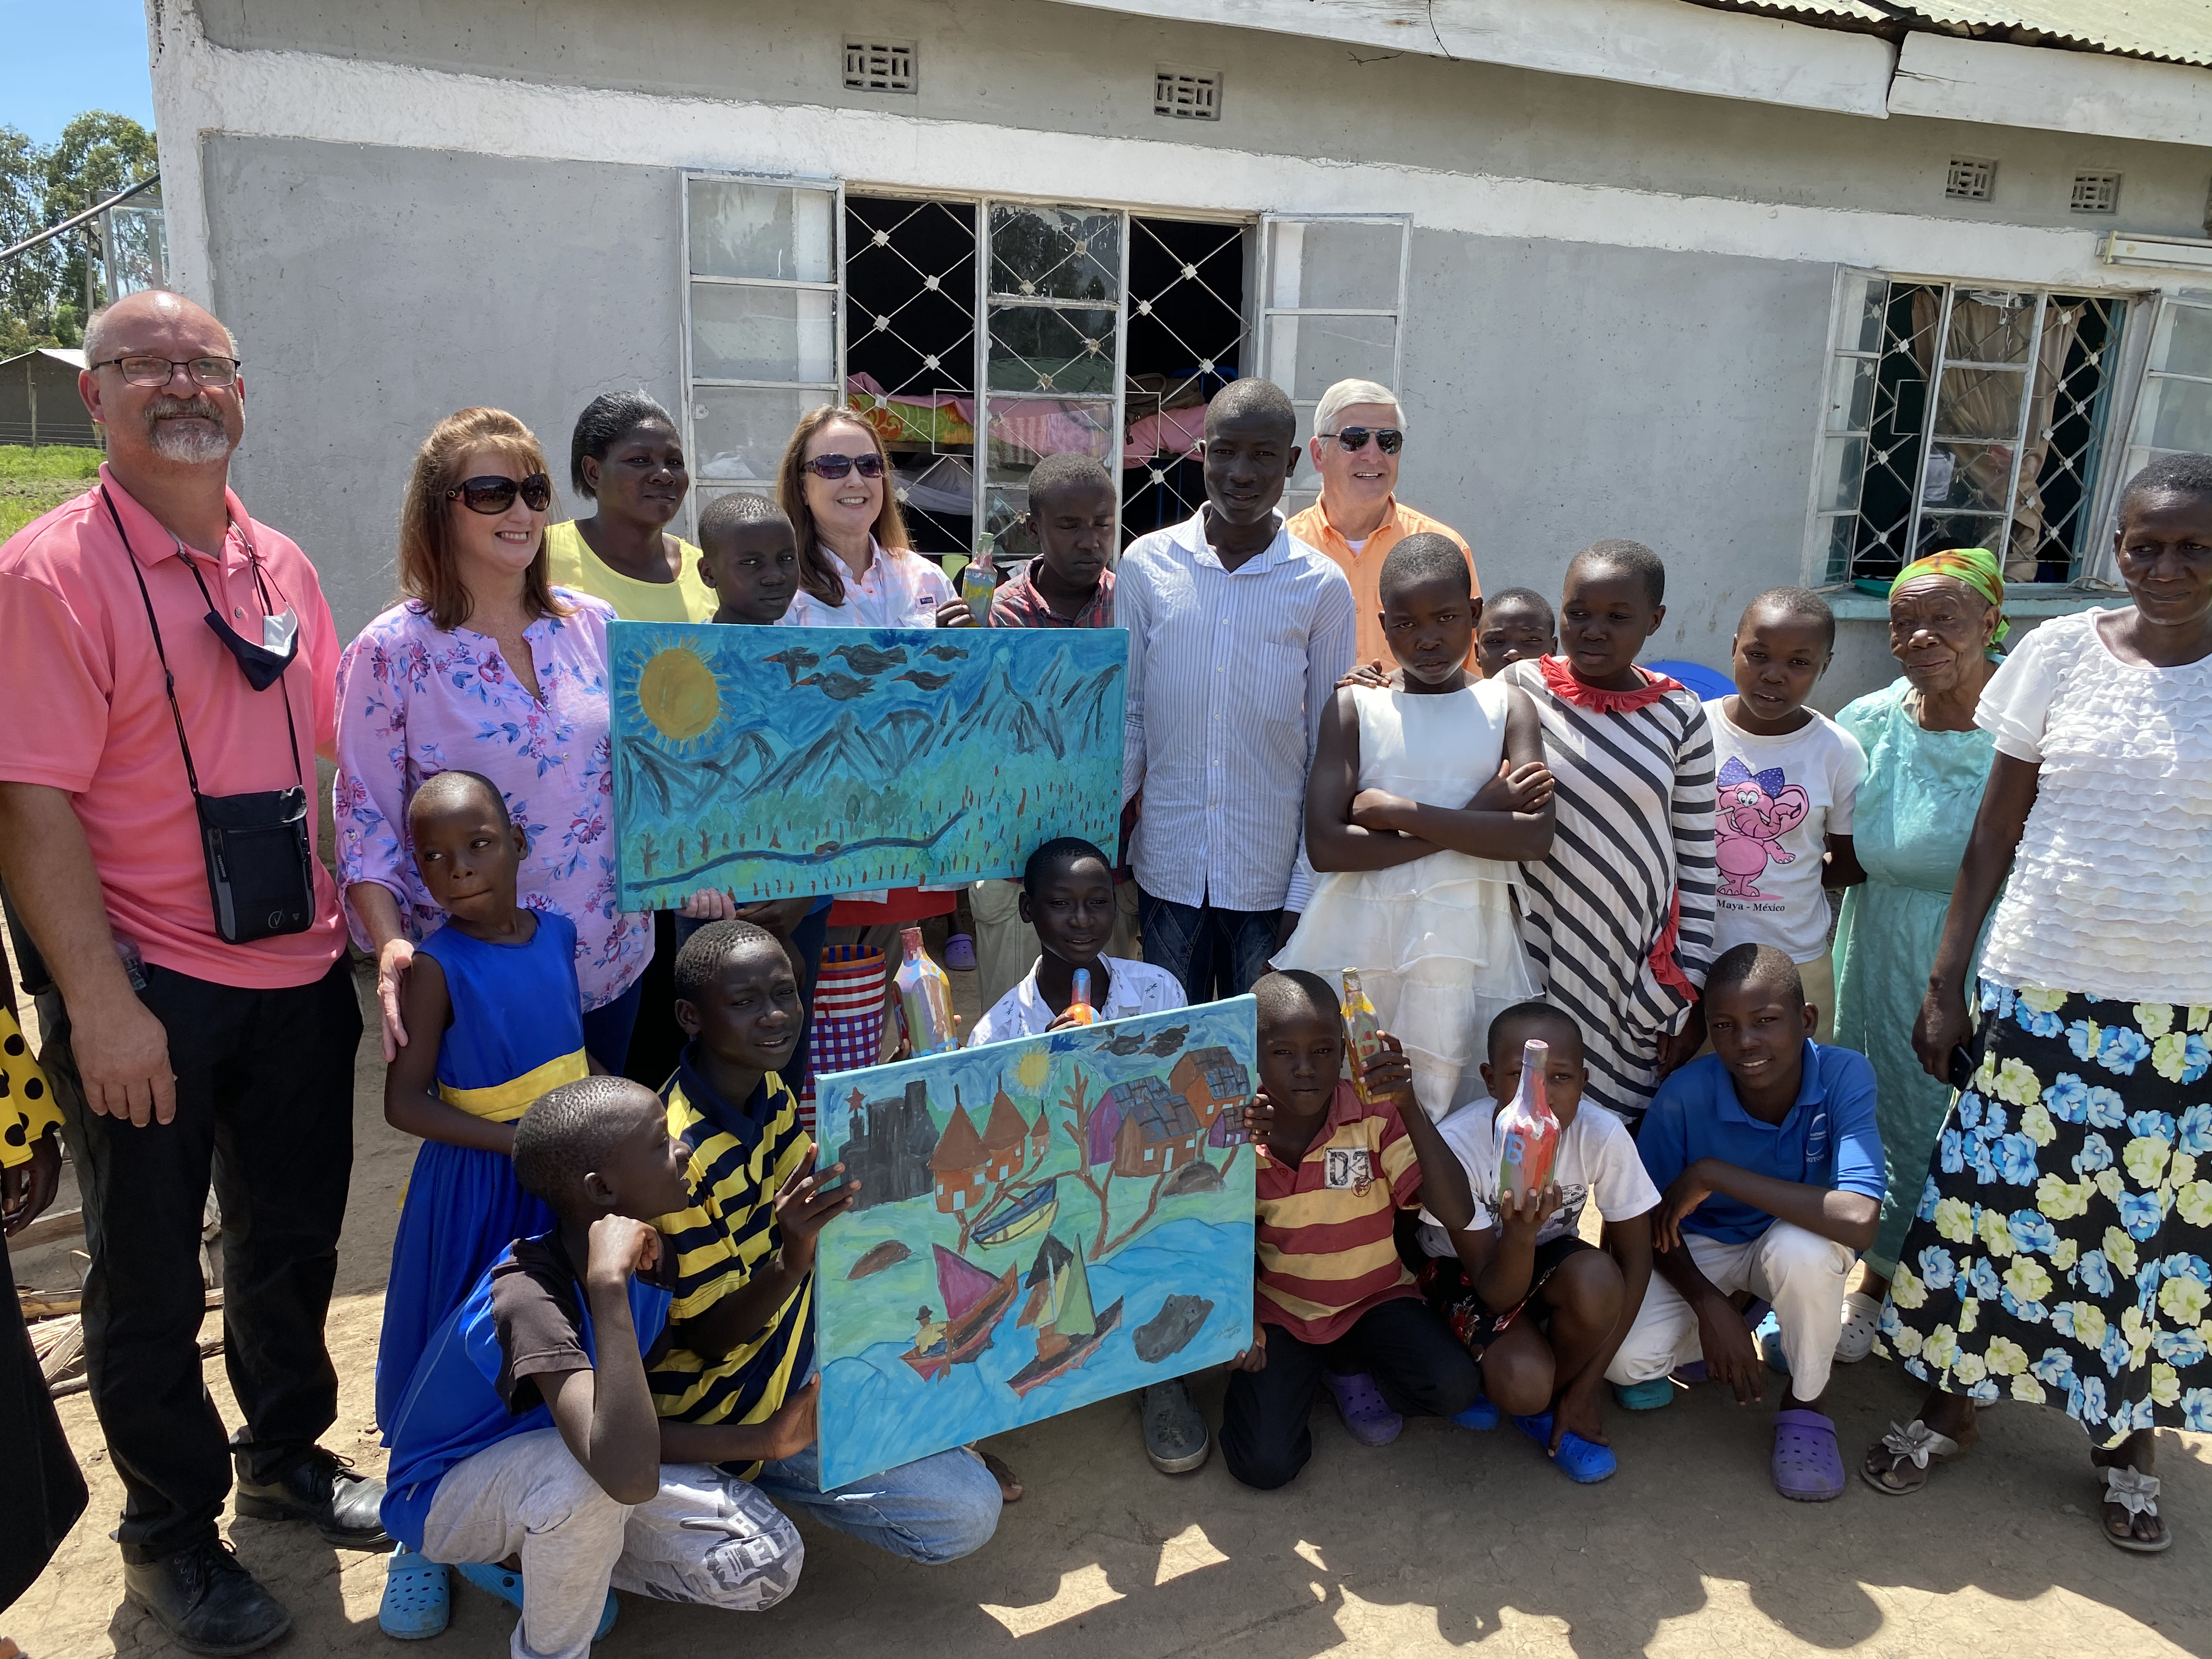 The talented artists showing off their work at the orphanage.